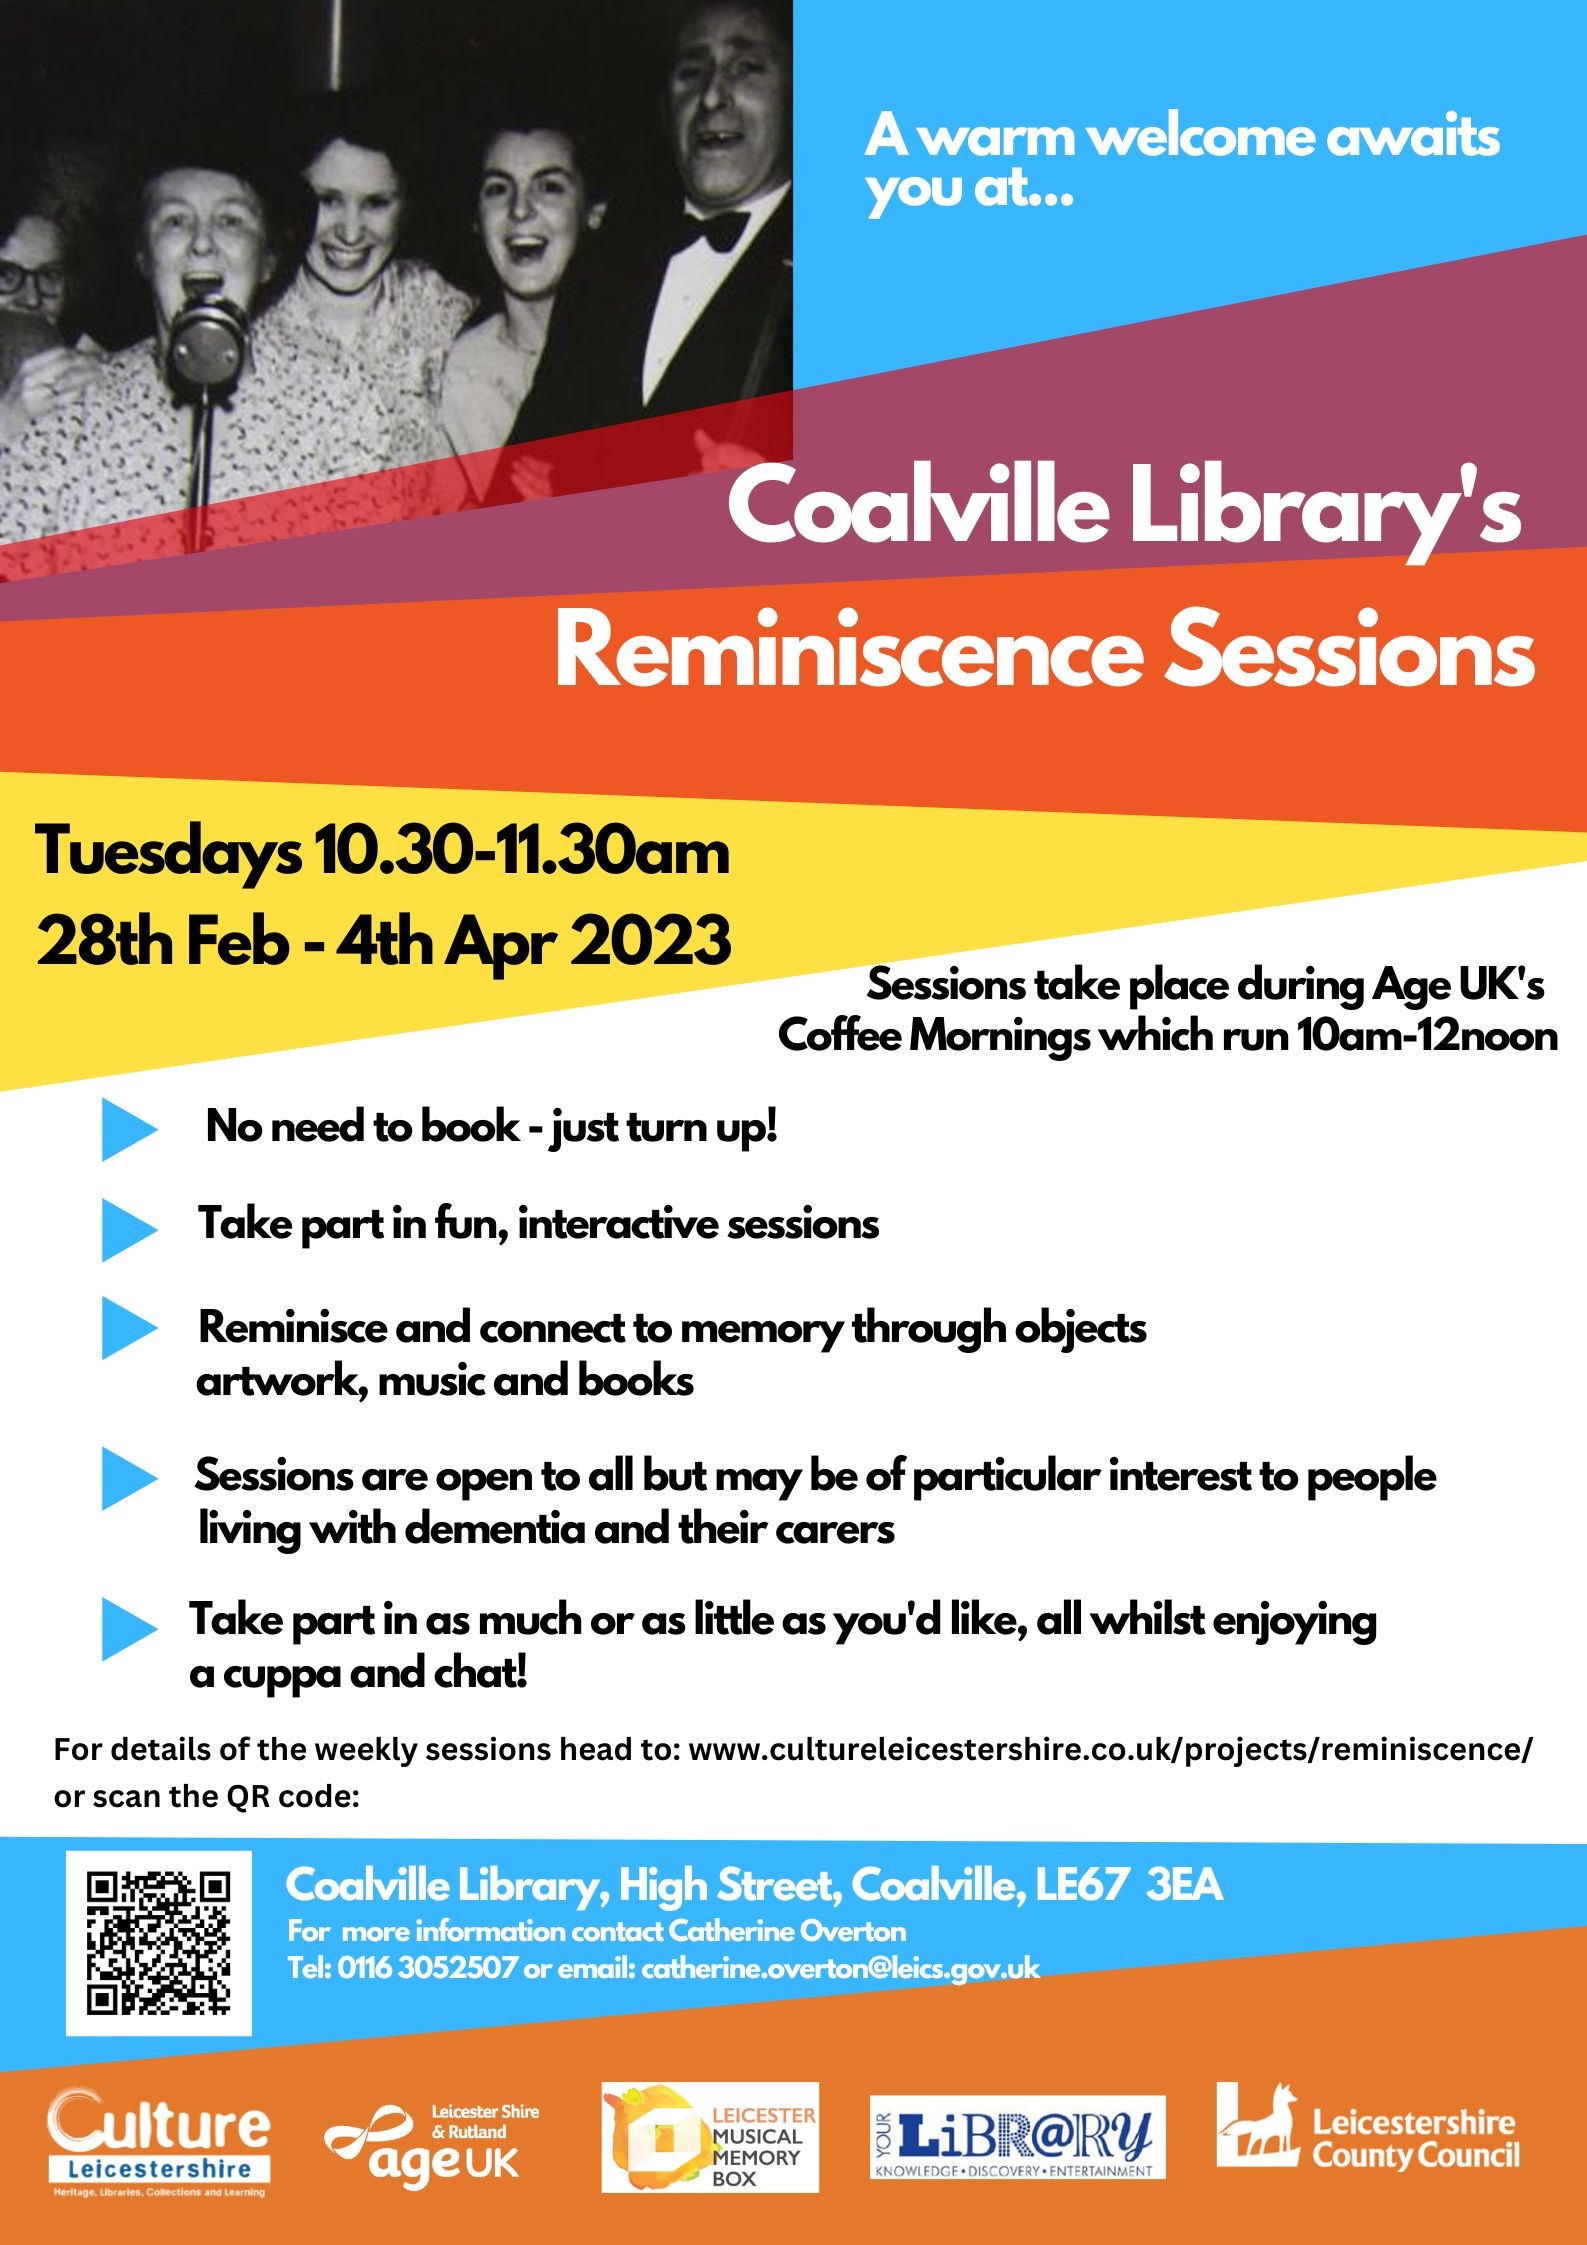 Reminiscence Sessions at Coalville Library | Culture Leicestershire ...